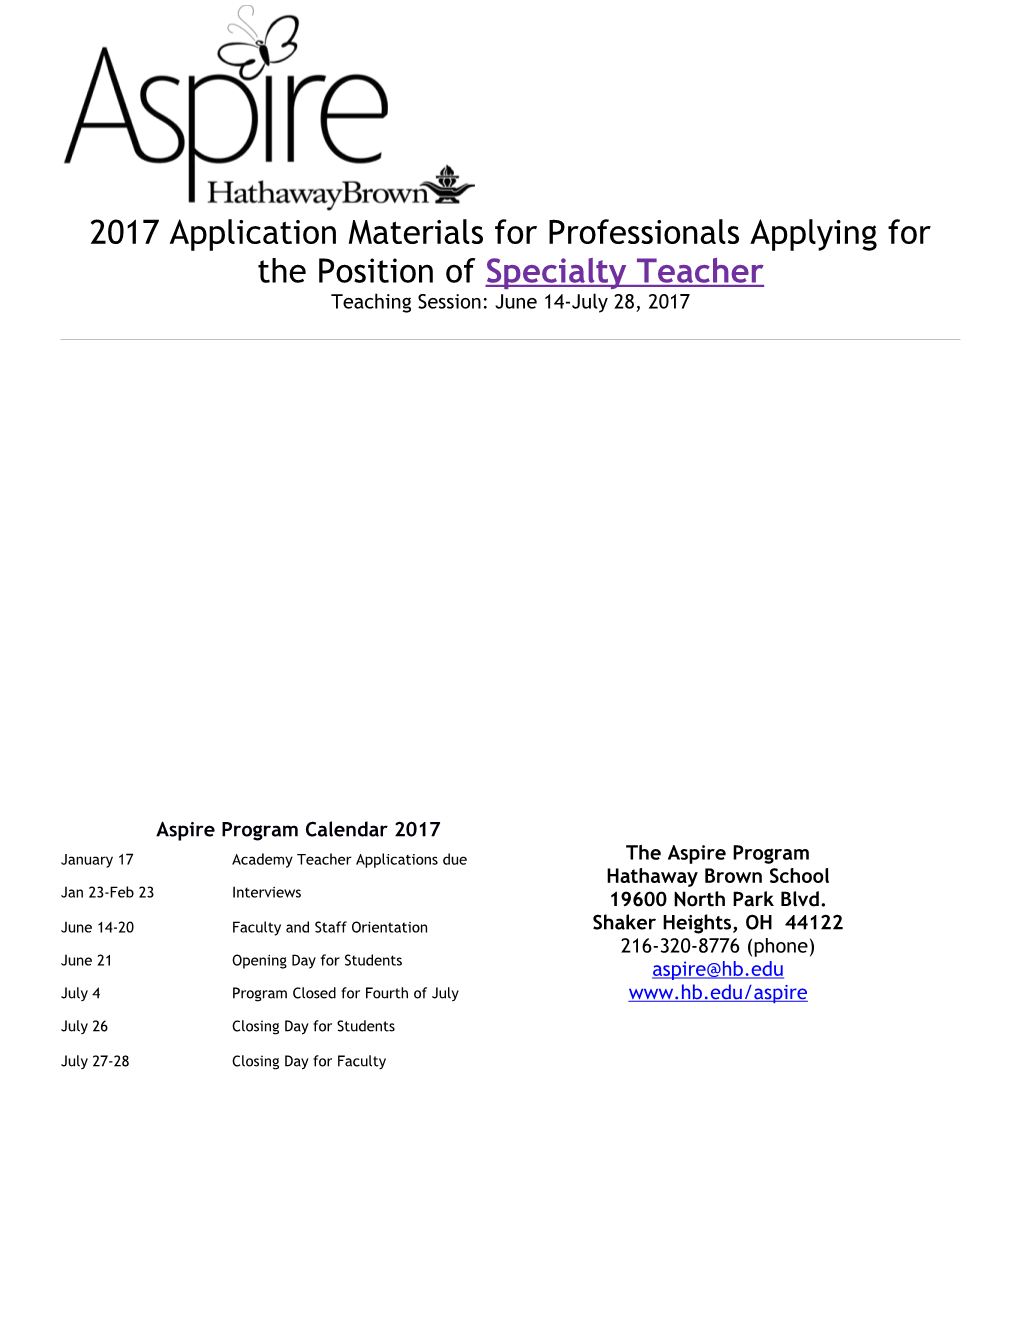 2017 Application Materials for Professionals Applying for the Position of Specialty Teacher